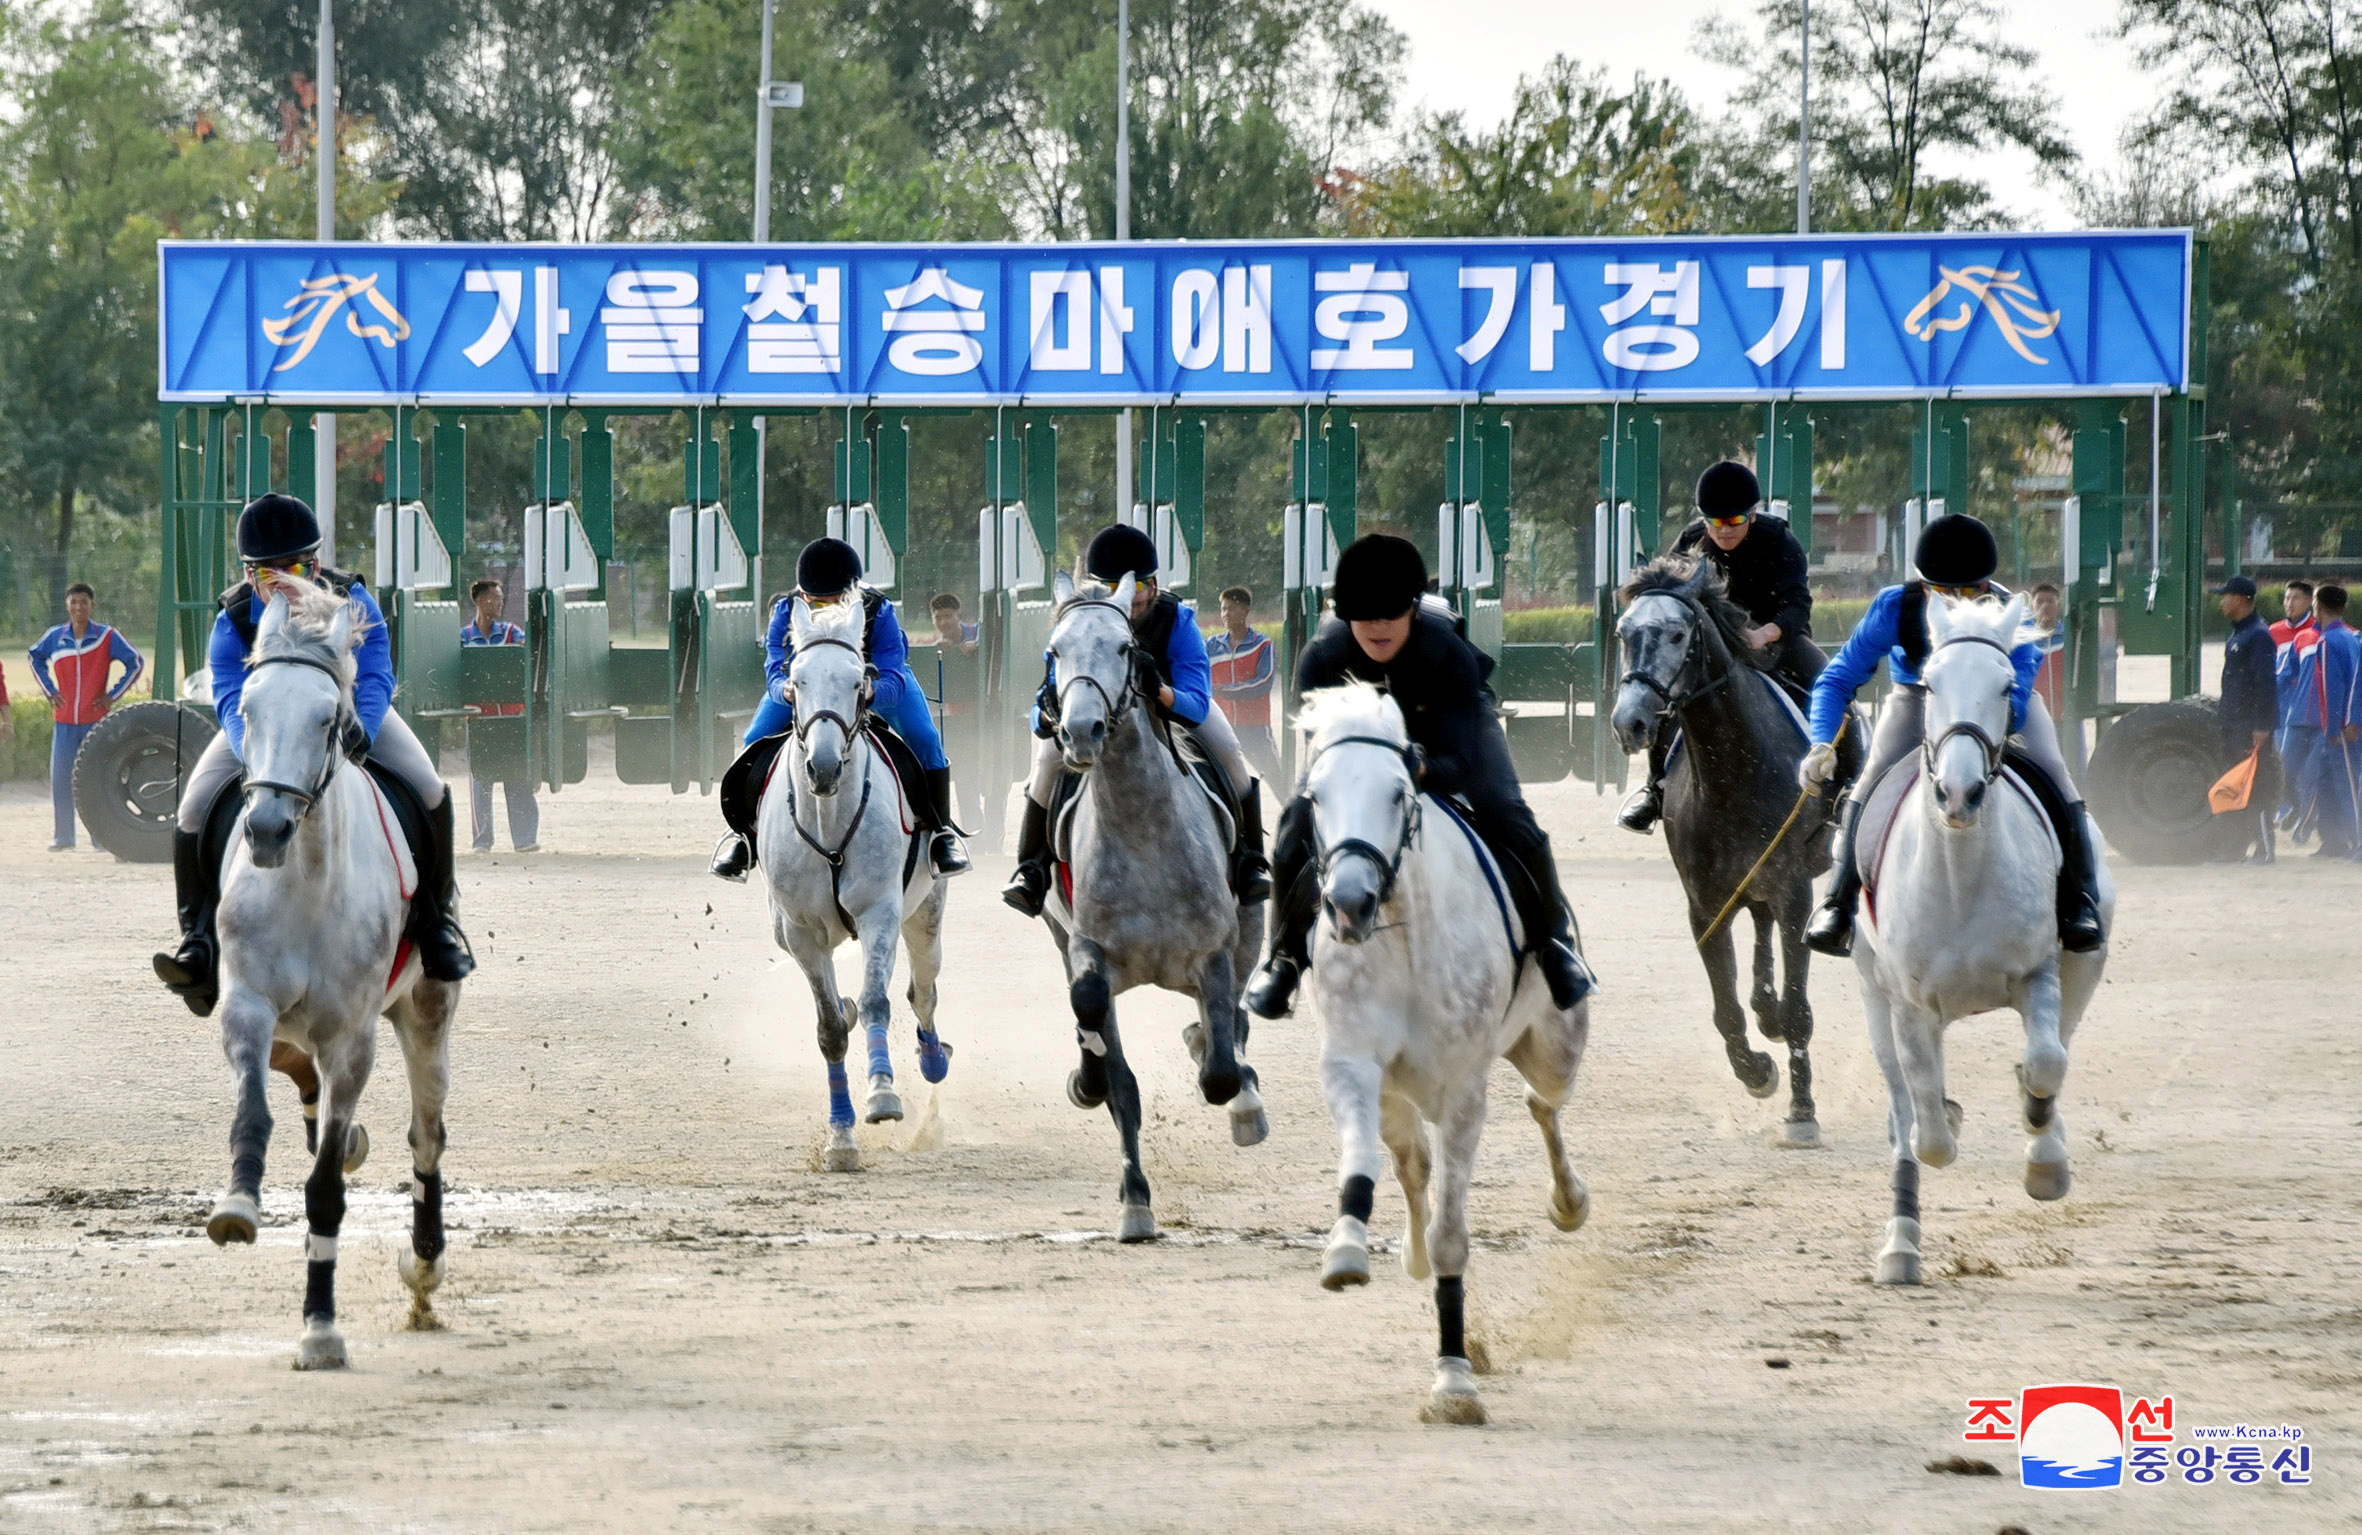 People take part in a horse riding game at the Mirim Equestrian Riding Club in Pyongyang